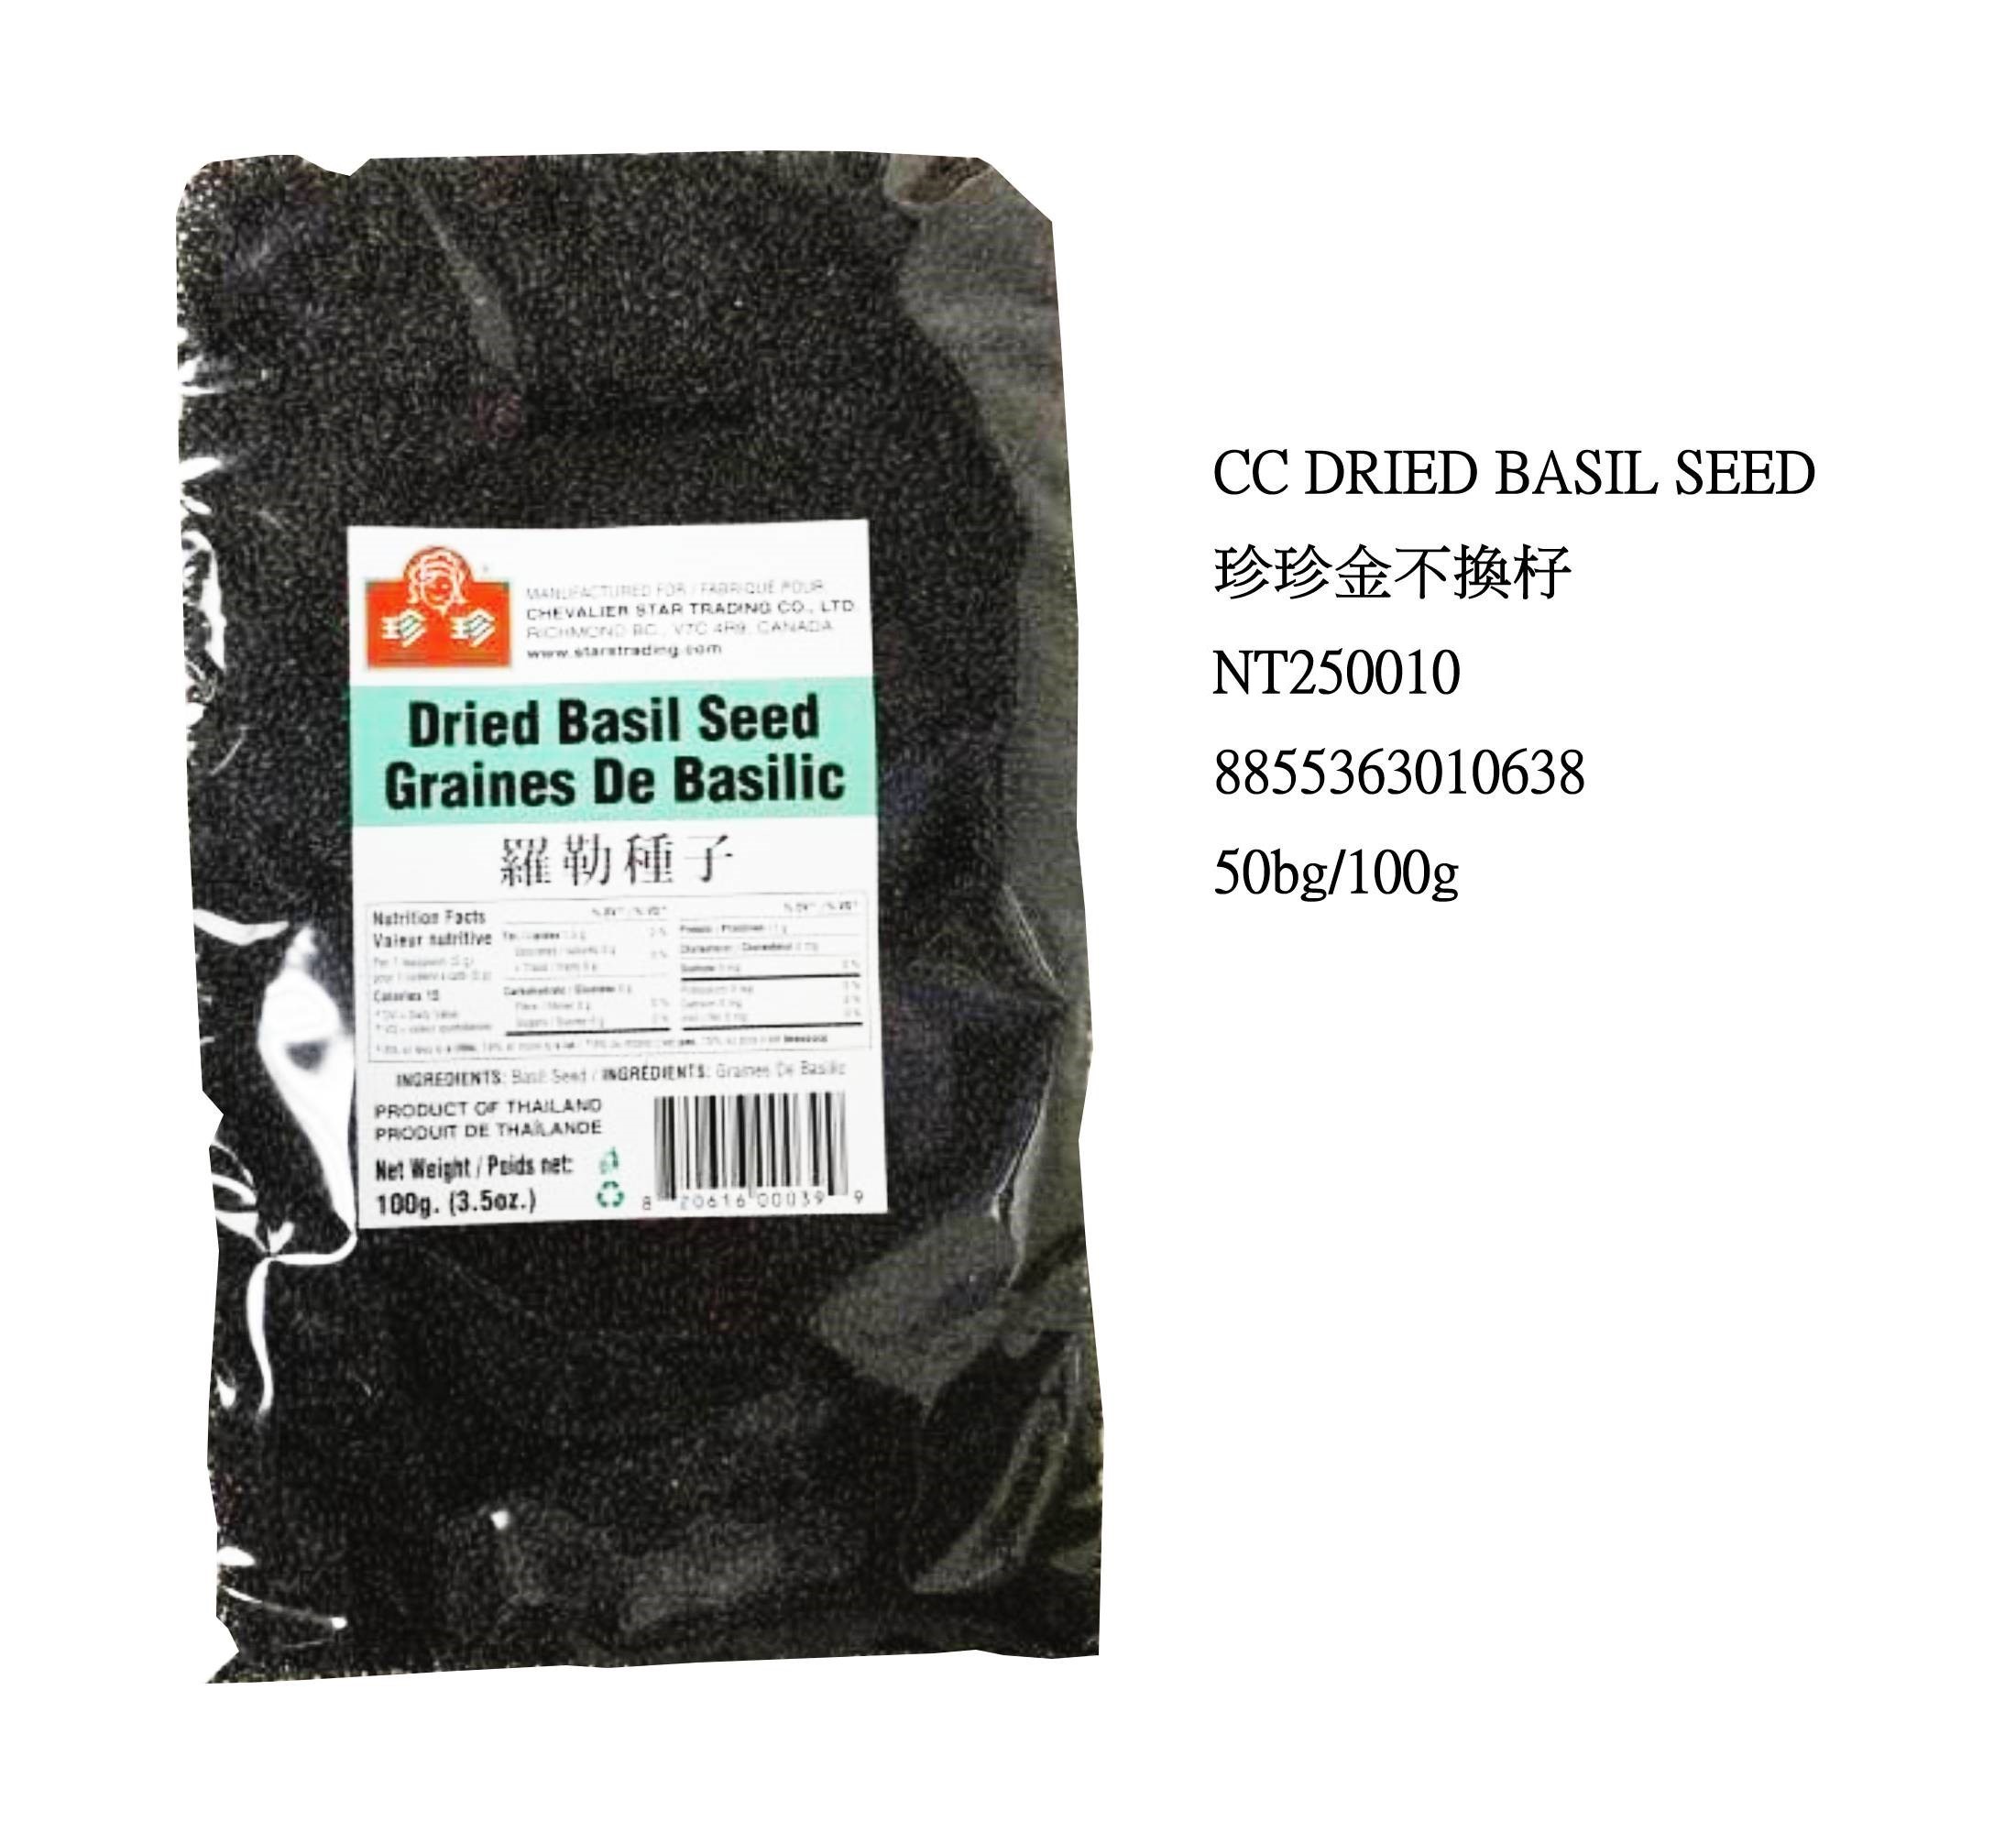 CHEN CHEN DRIED BASIL SEED NT250010